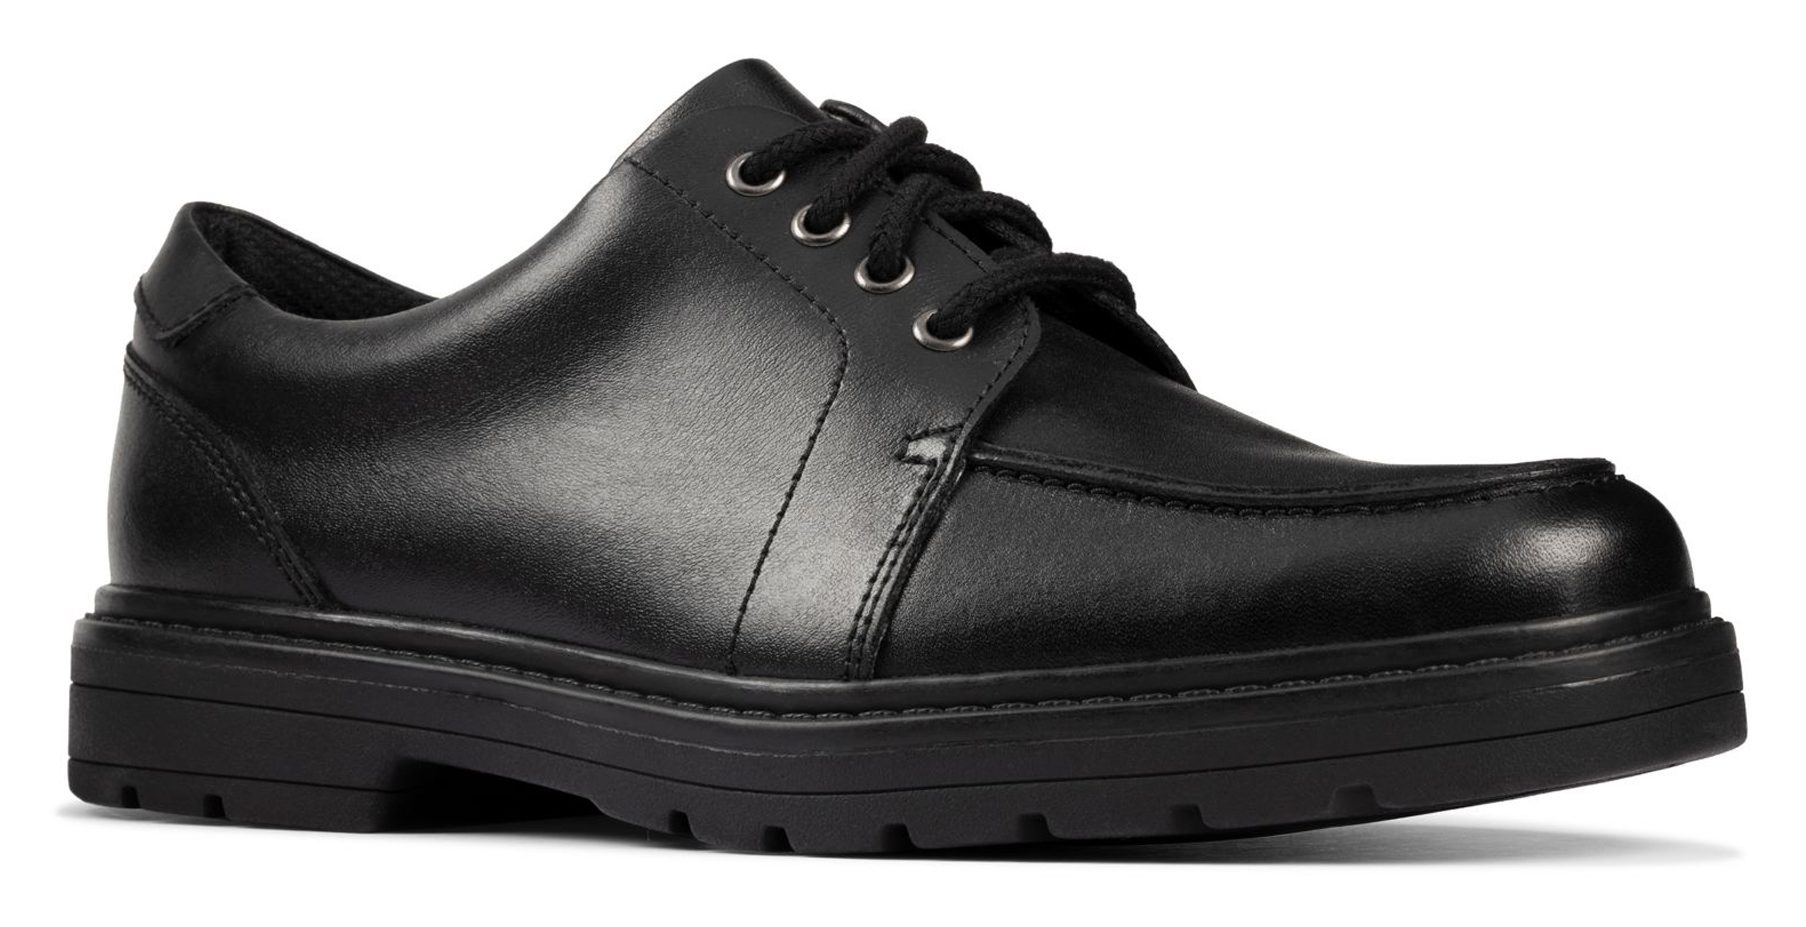 Clarks Loxham Pace Youth Black Leather 26151592 - Boys School Shoes ...